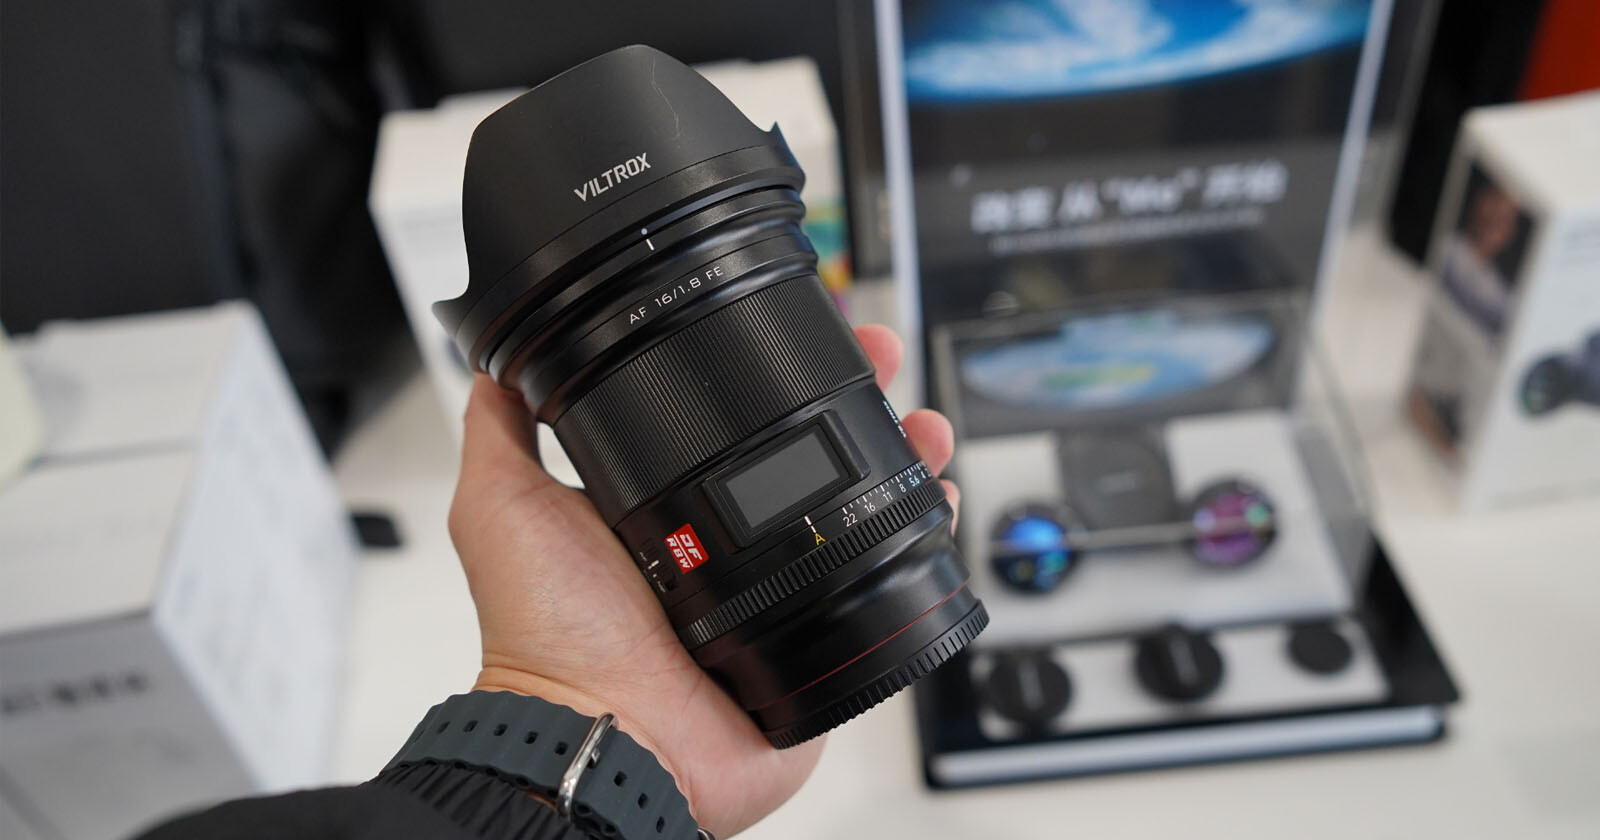 Viltrox’s New 16mm f/1.8 Sony Lens Features Autofocus and a Large LCD